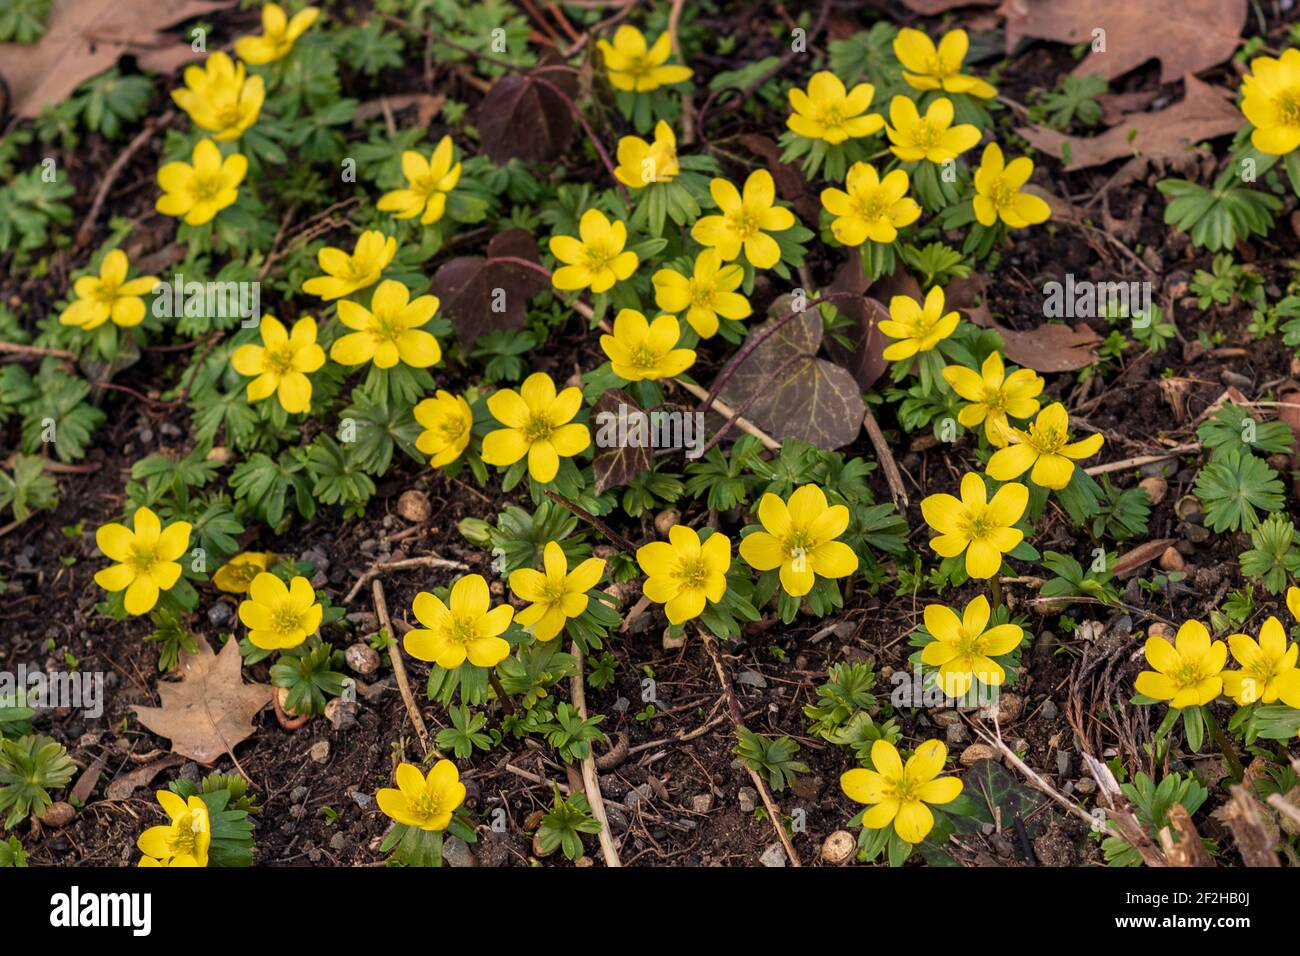 Field of yellow flowering winter aconite flowers (Eranthis hyemalis) in early spring, close up and full frame Stock Photo